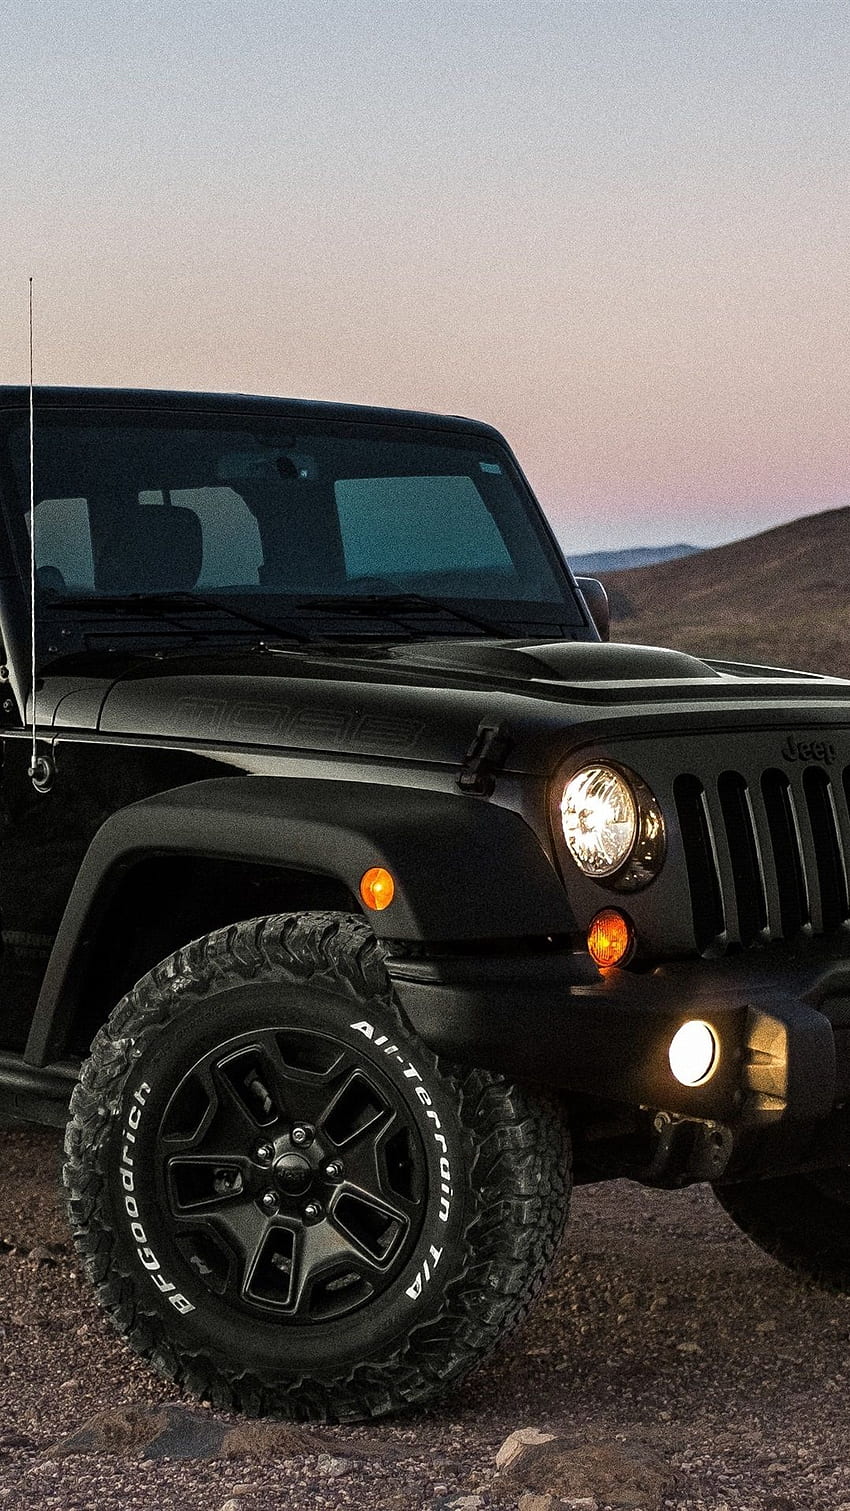 3840x2852 / 3840x2852 jeep wrangler rubicon rocks star 4k free wallpaper  wide - Coolwallpapers.me!